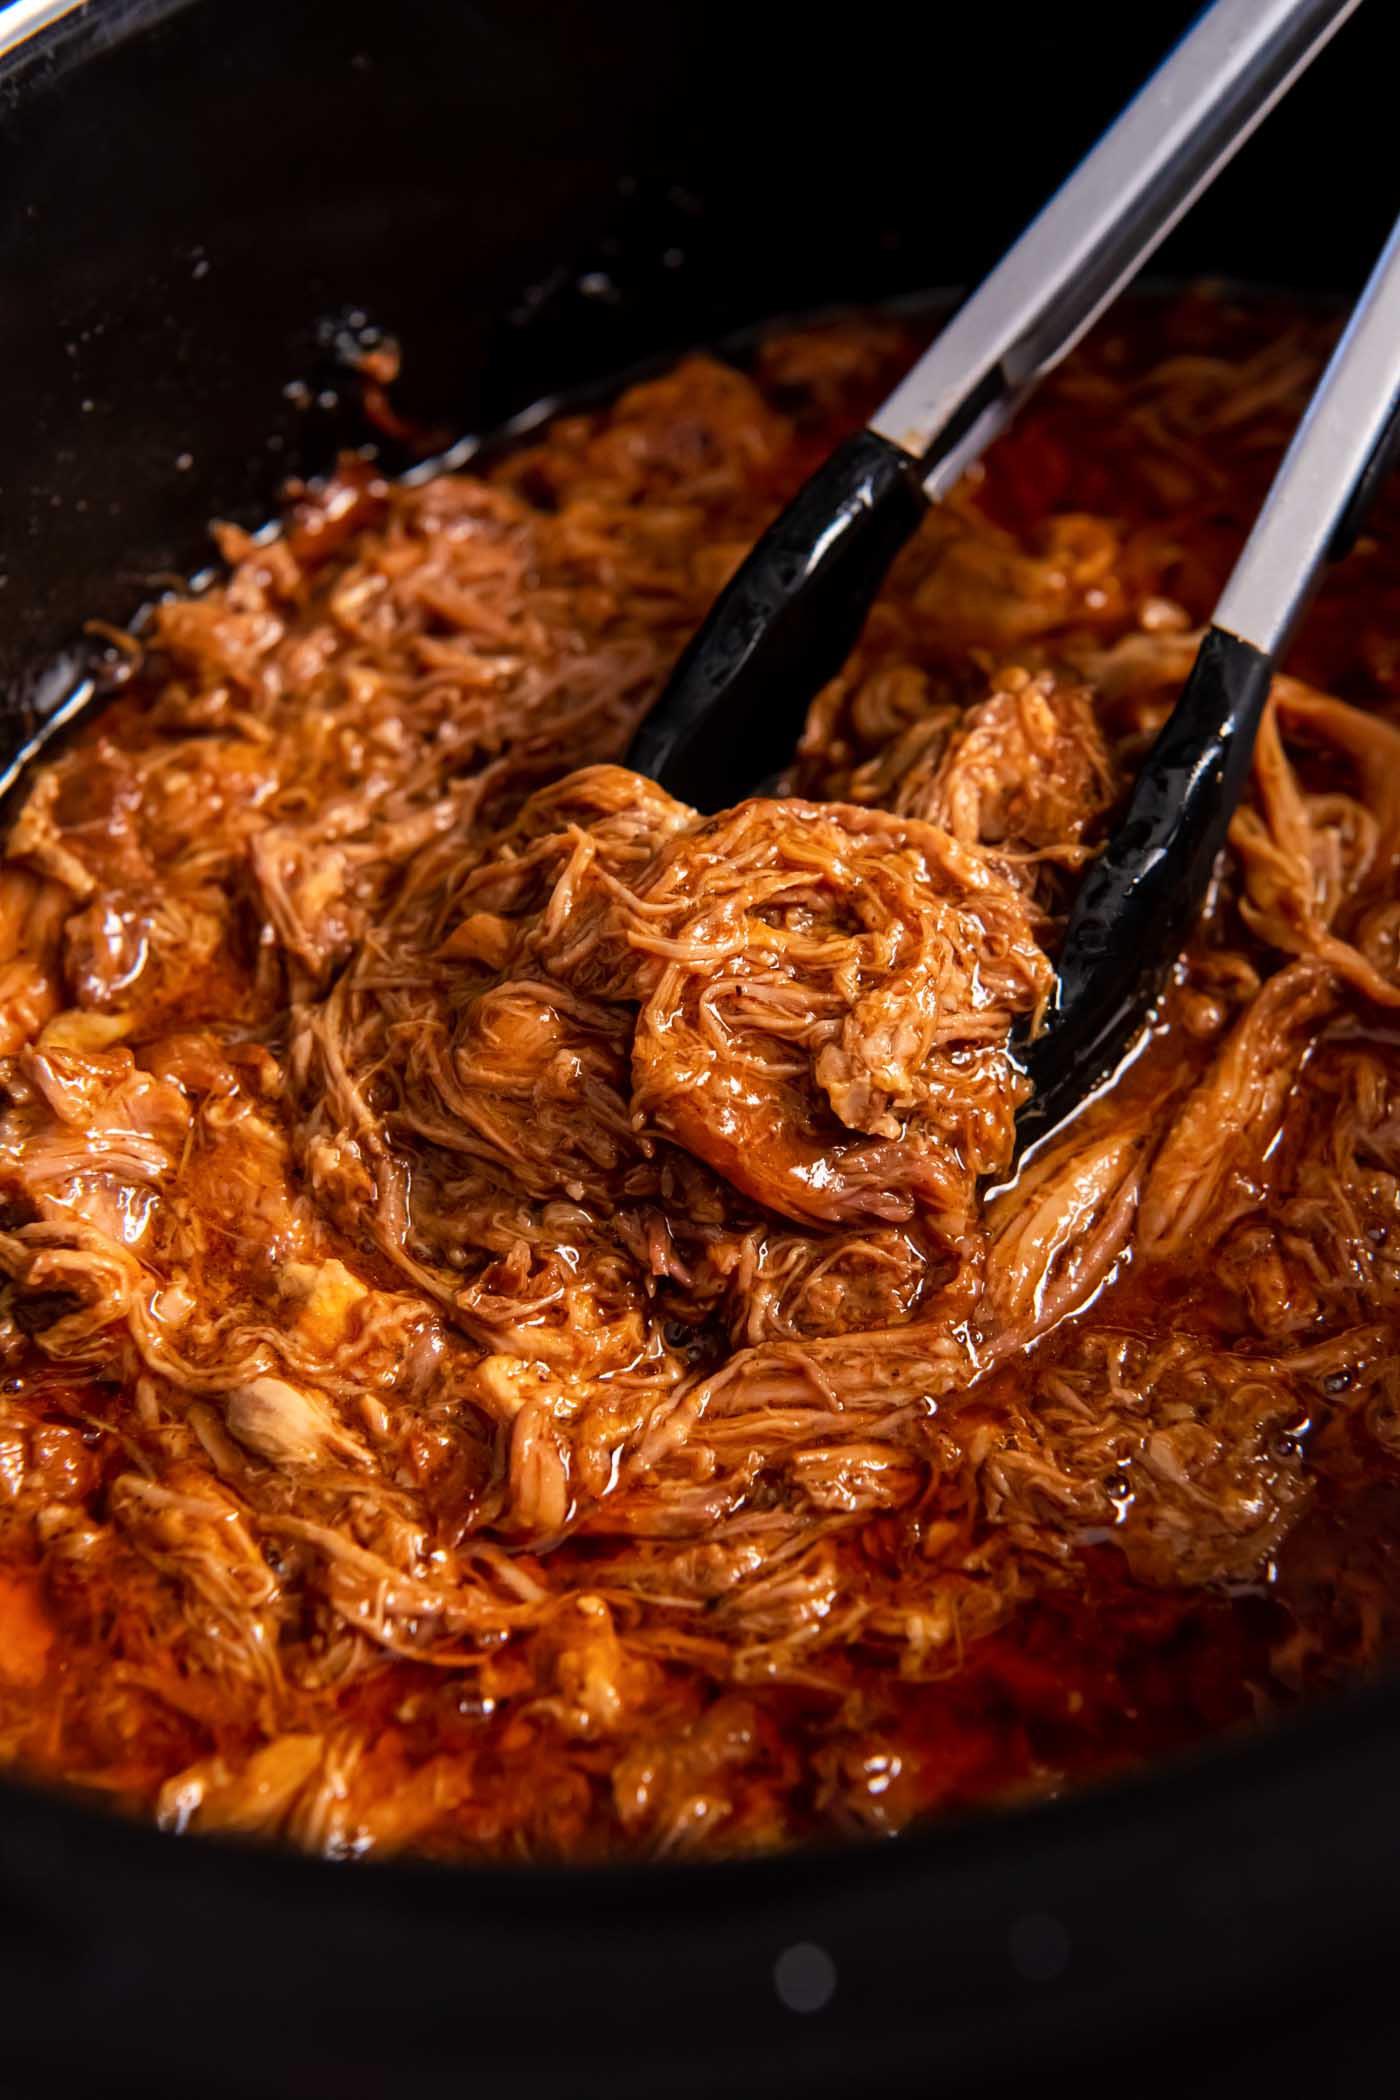 Shredded bbq pulled pork in slow cooker with tongs.